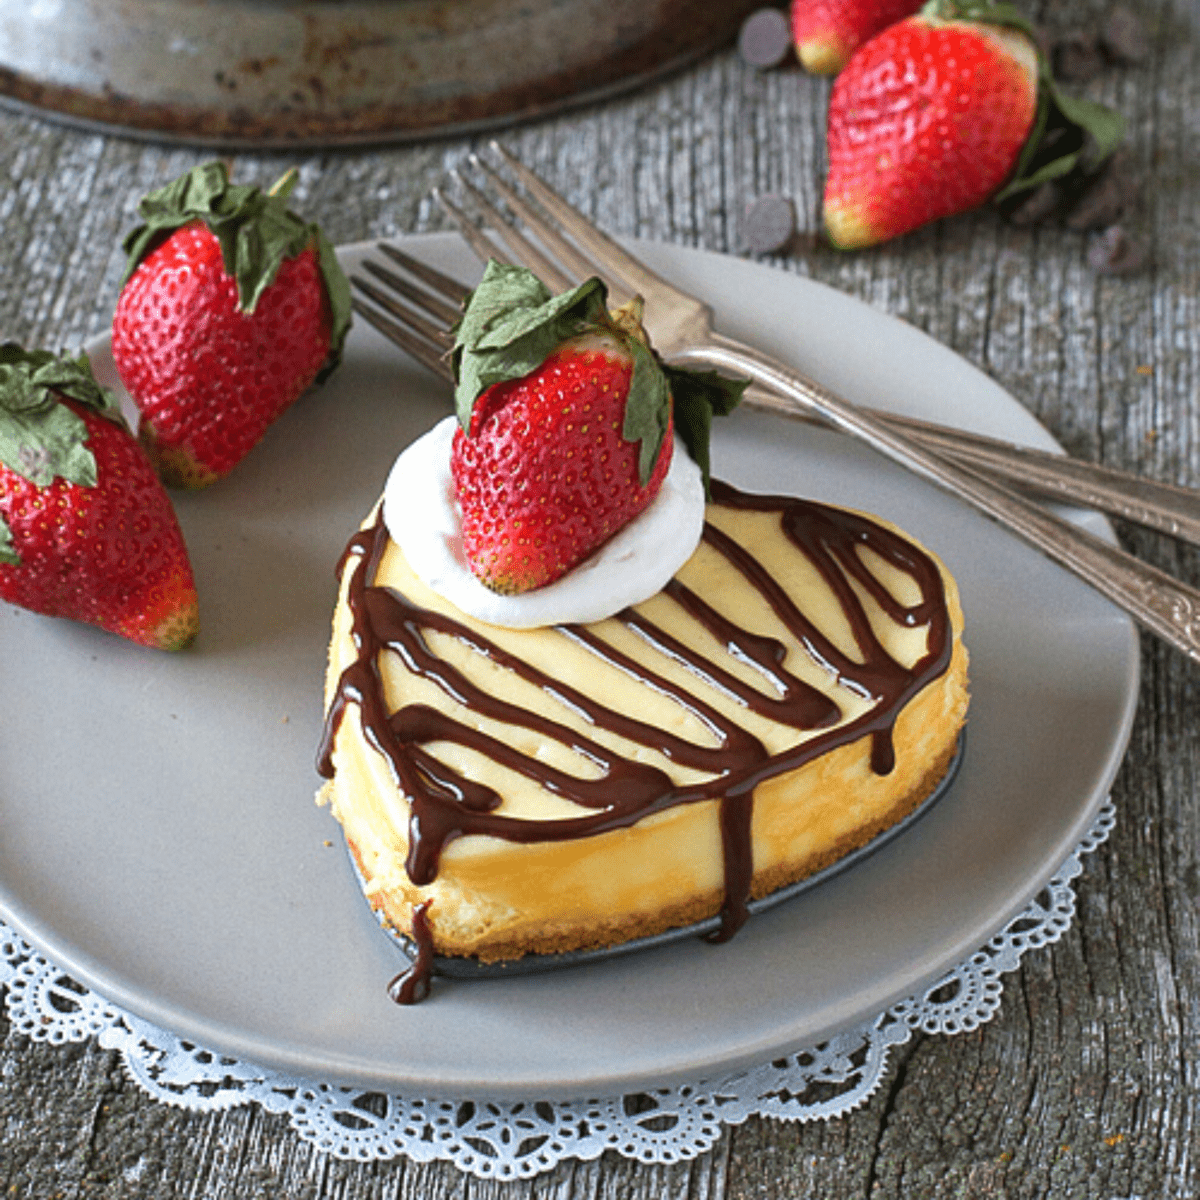 https://thefirstyearblog.com/wp-content/uploads/2015/02/heart-shape-cheesecake-Square1.png